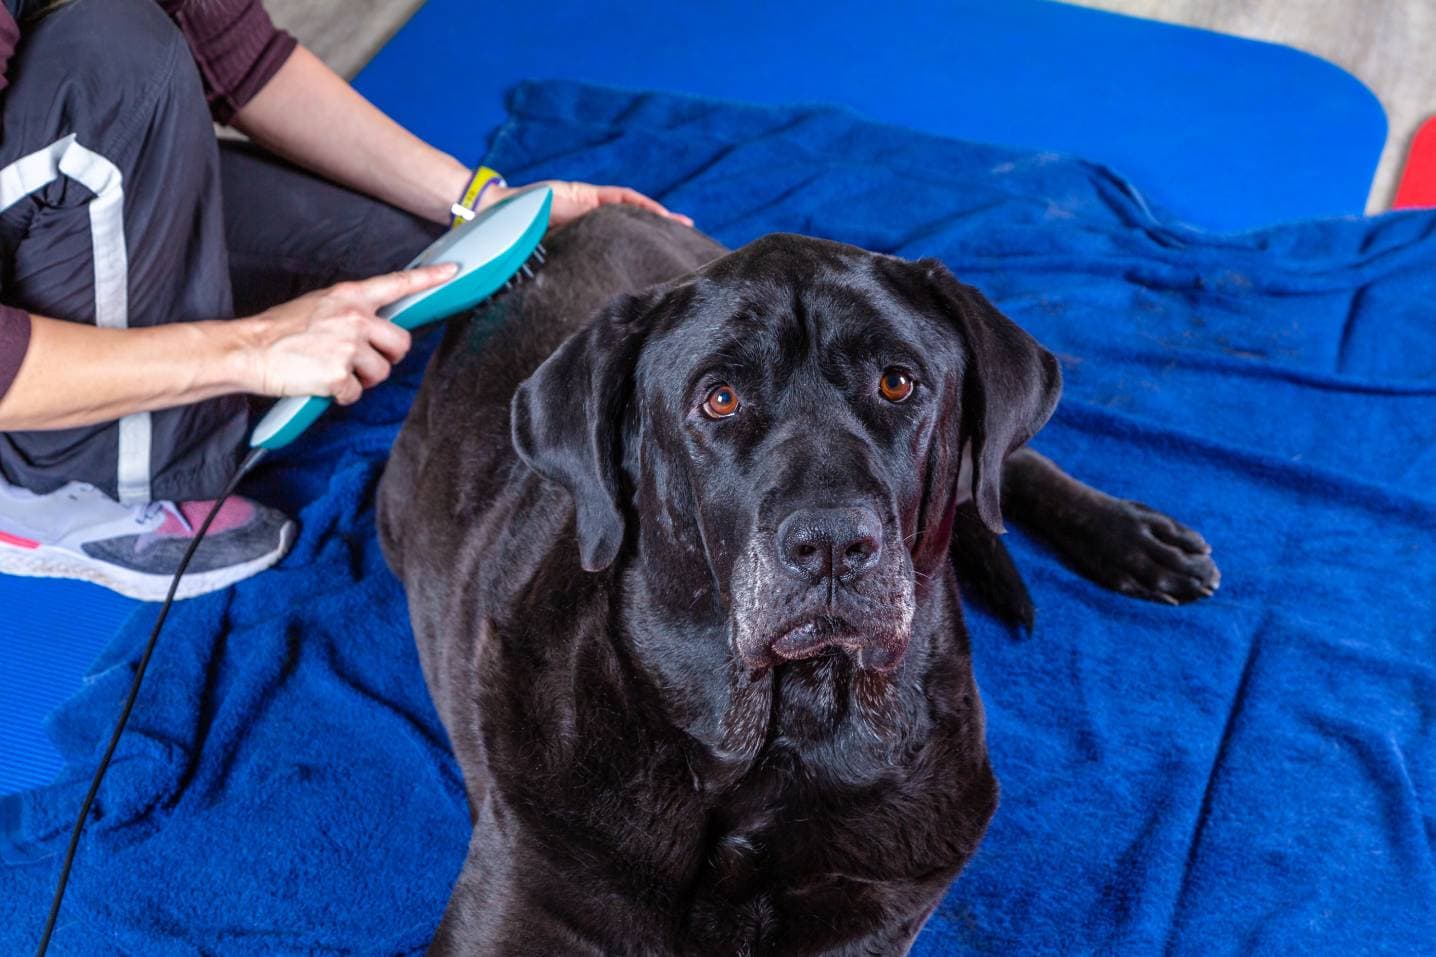 big black dog gets laser therapy during treatment msgrafixx Shutterstock